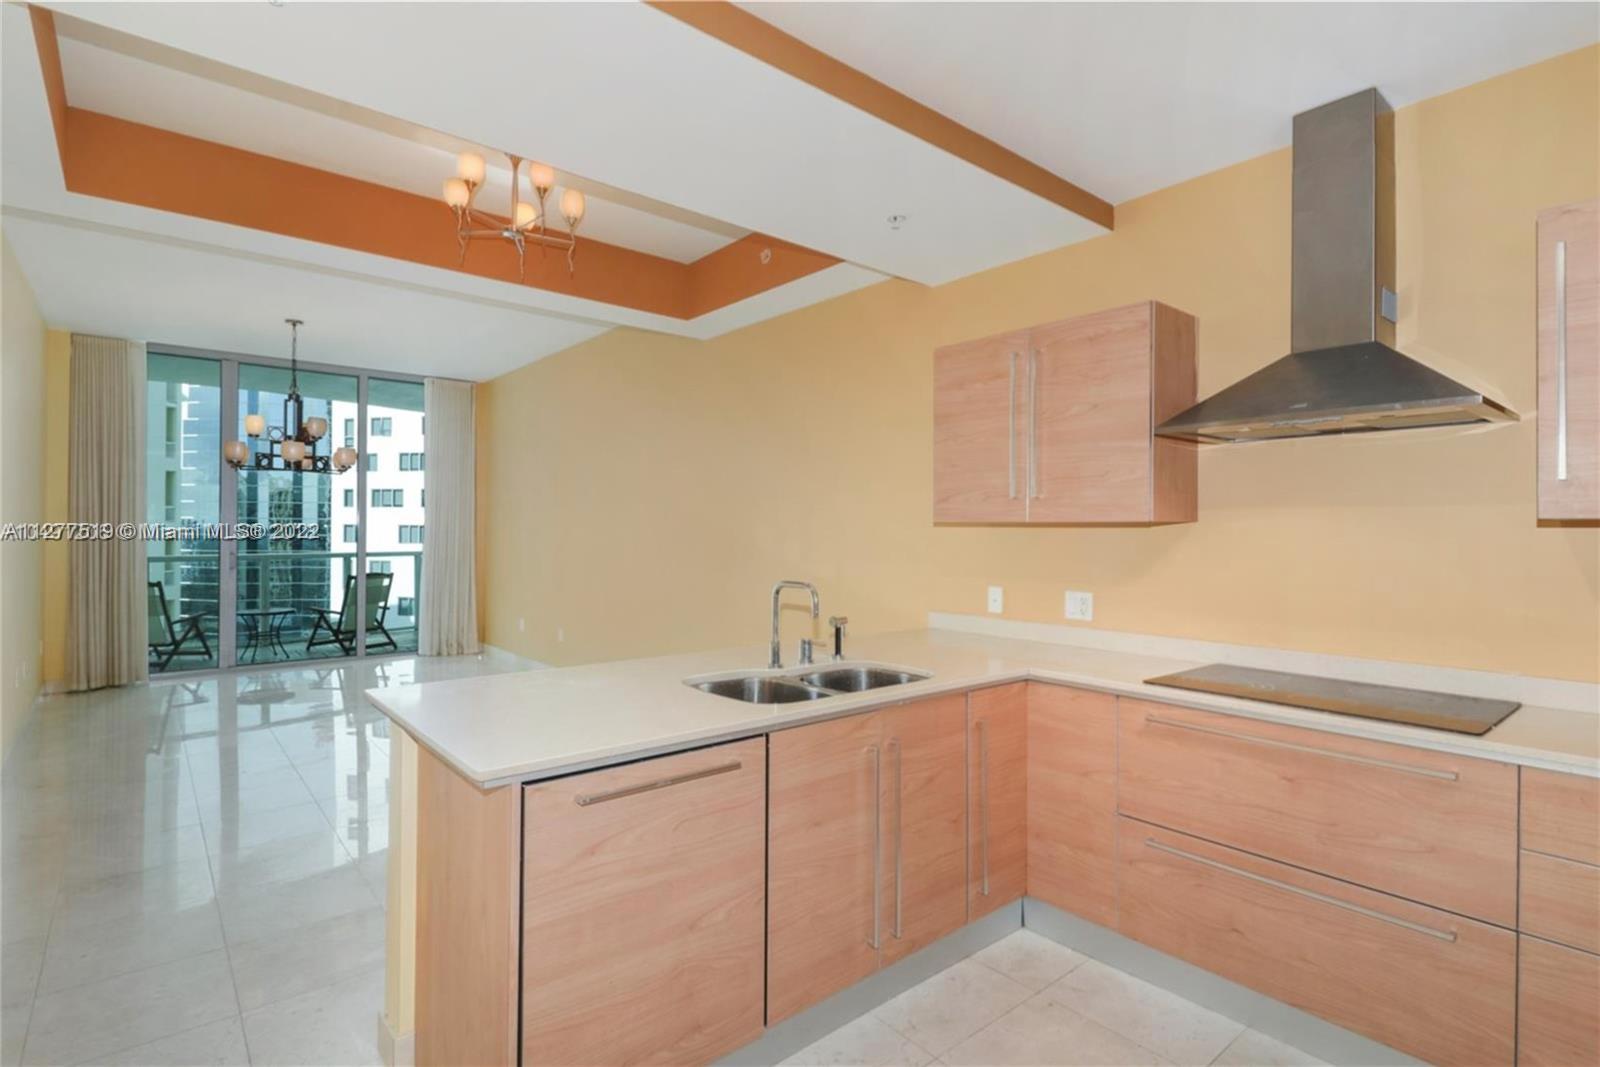 Stunning urban living at The Emerald. Located in the heart of Brickell, this beautiful, ready to mov